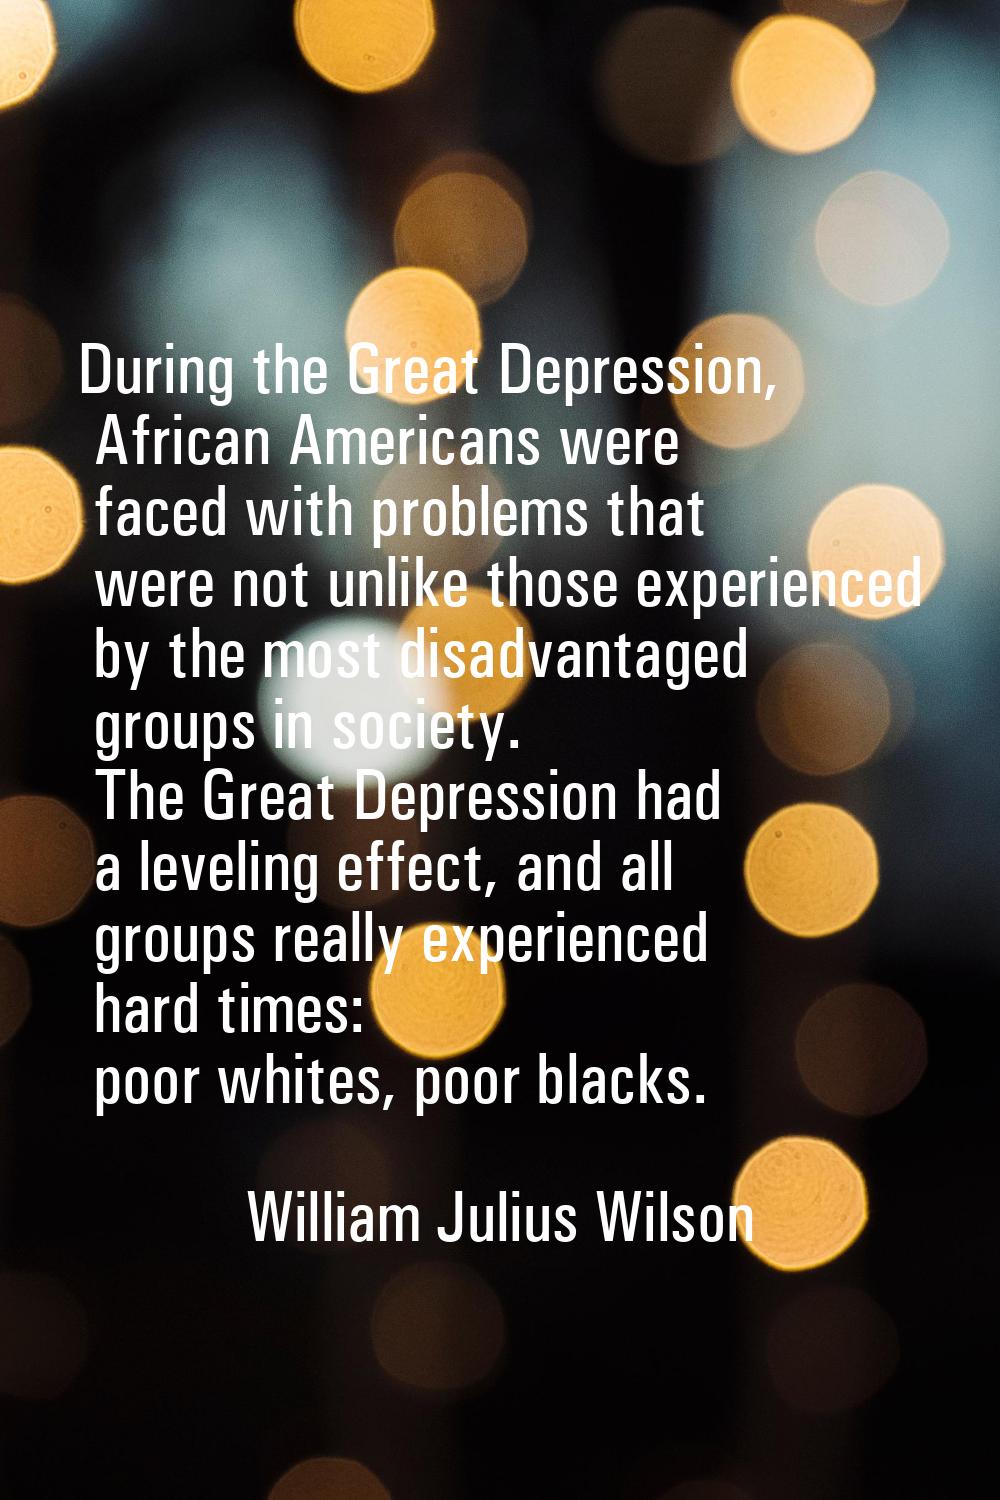 During the Great Depression, African Americans were faced with problems that were not unlike those 